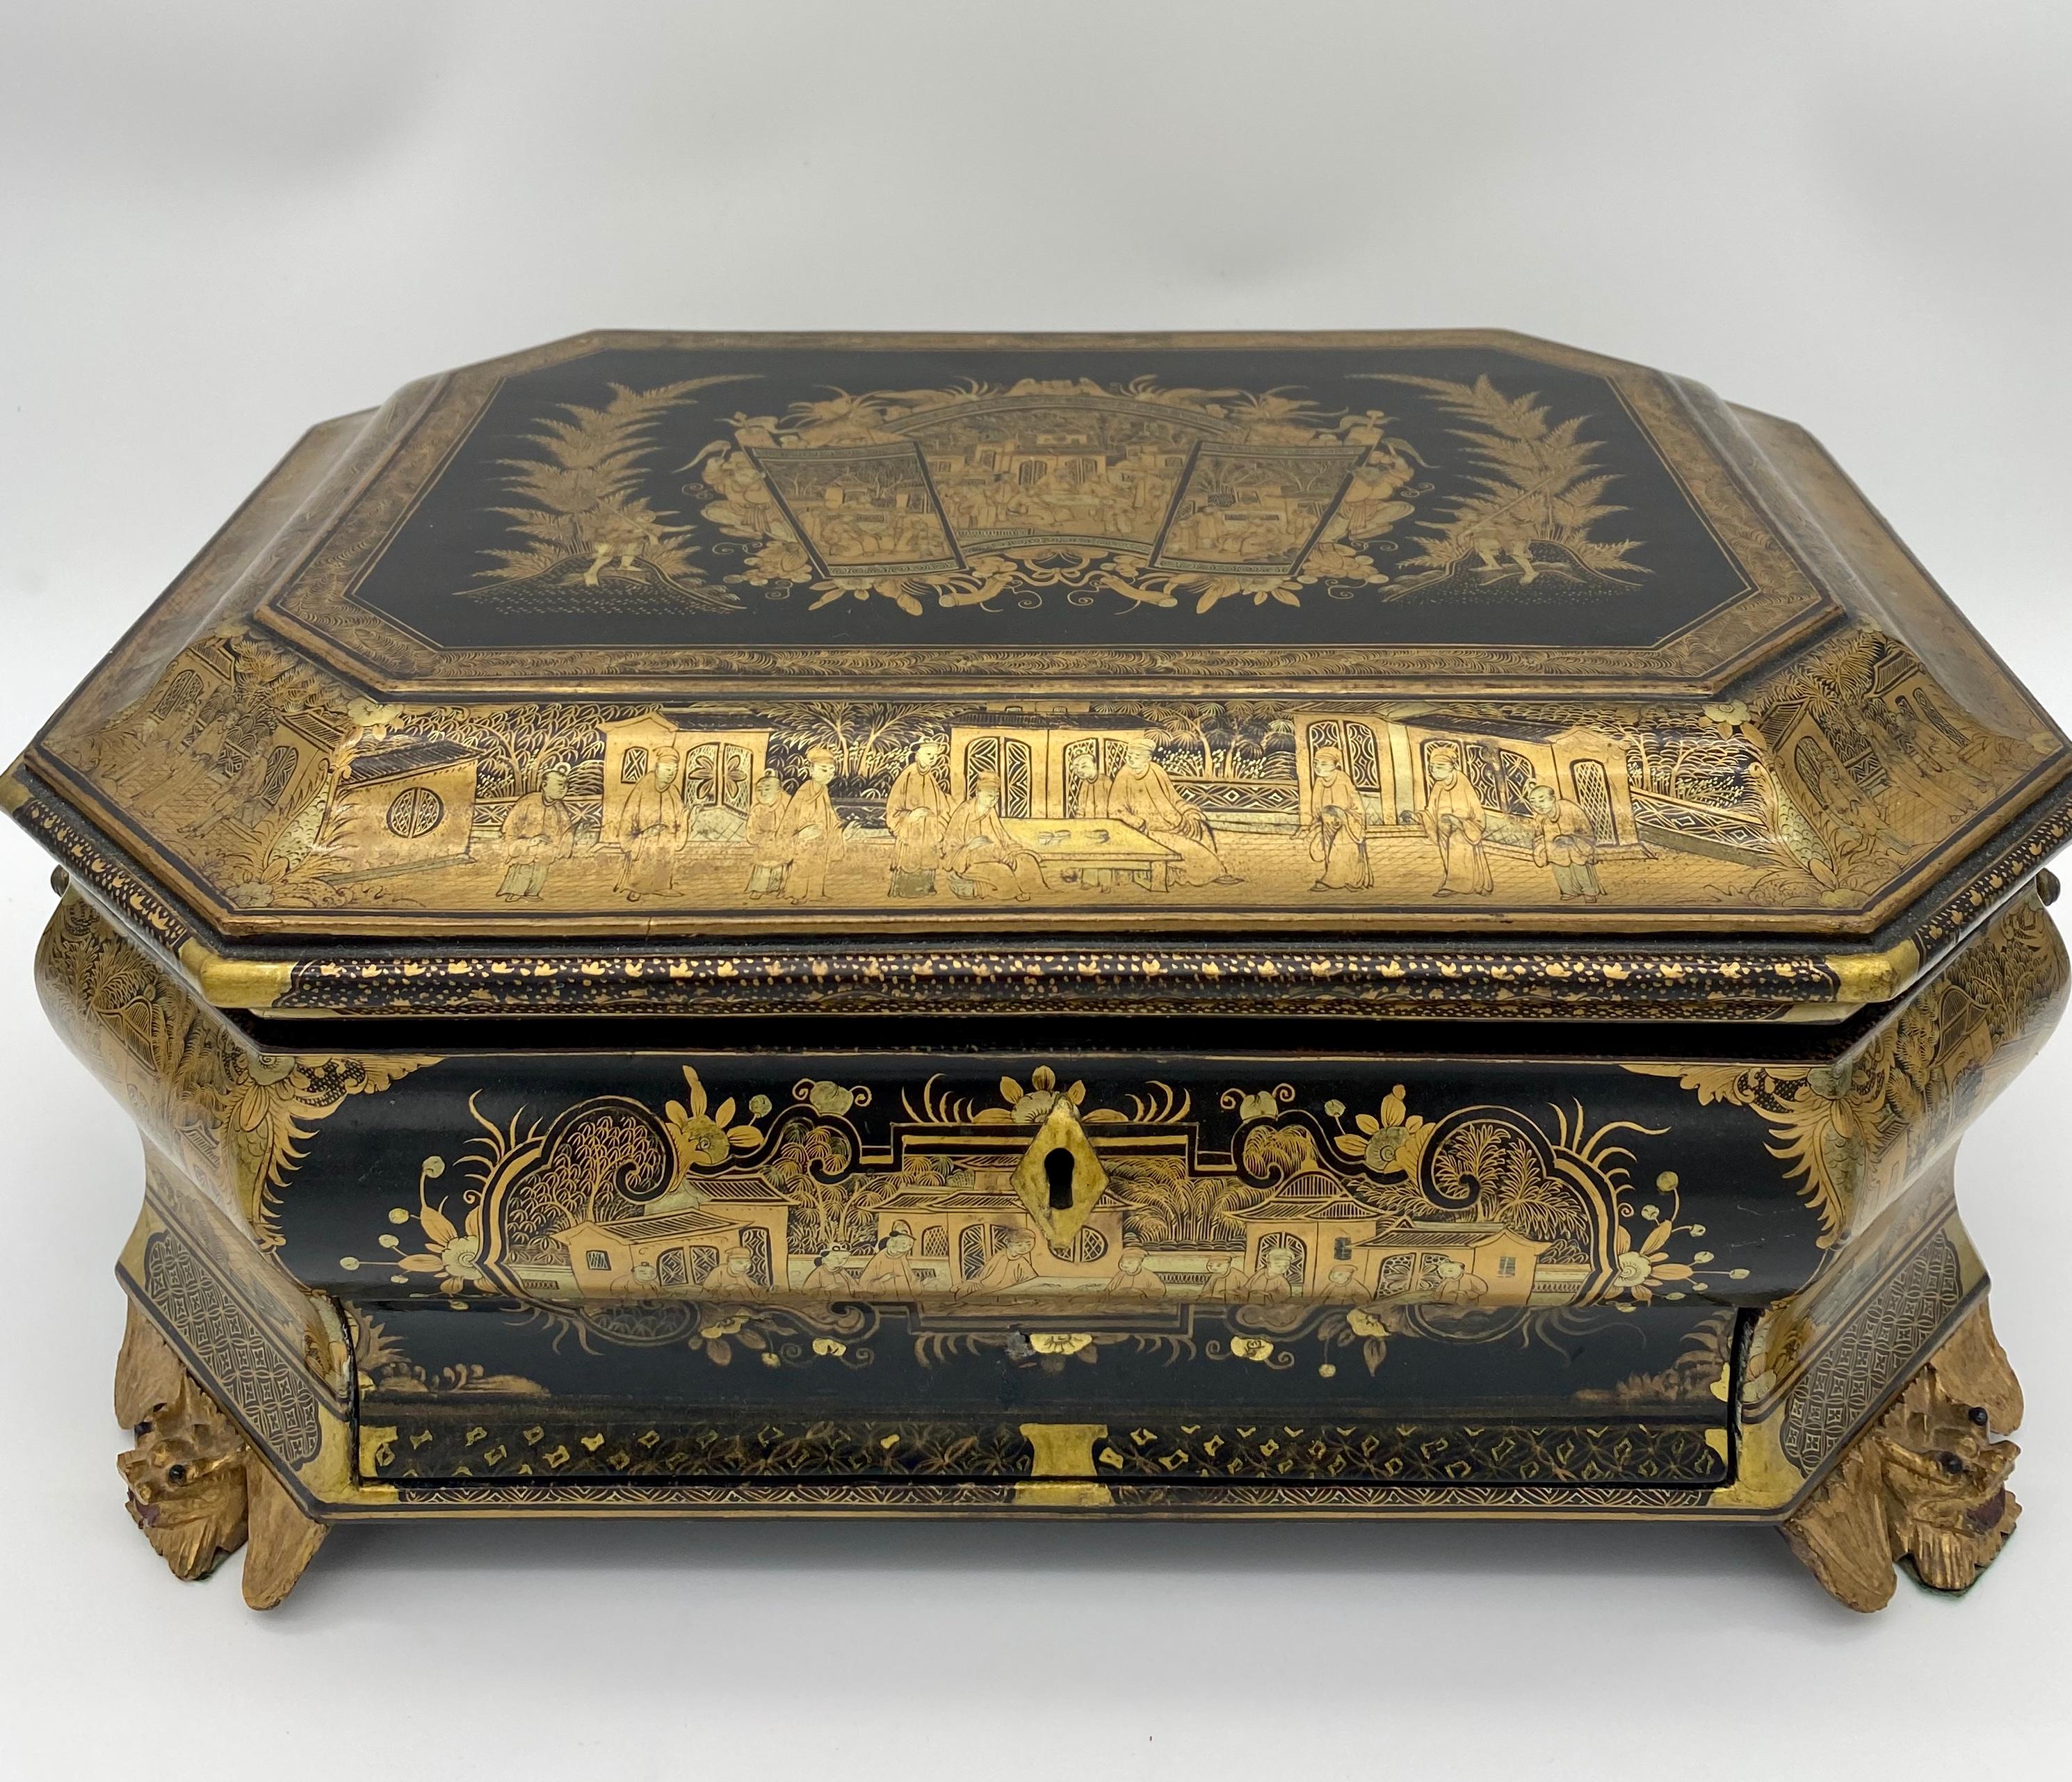 19th century Chinese lacquer sewing box from the Qing dynasty. Colored black and gold all-over beautifully with intricate designs.